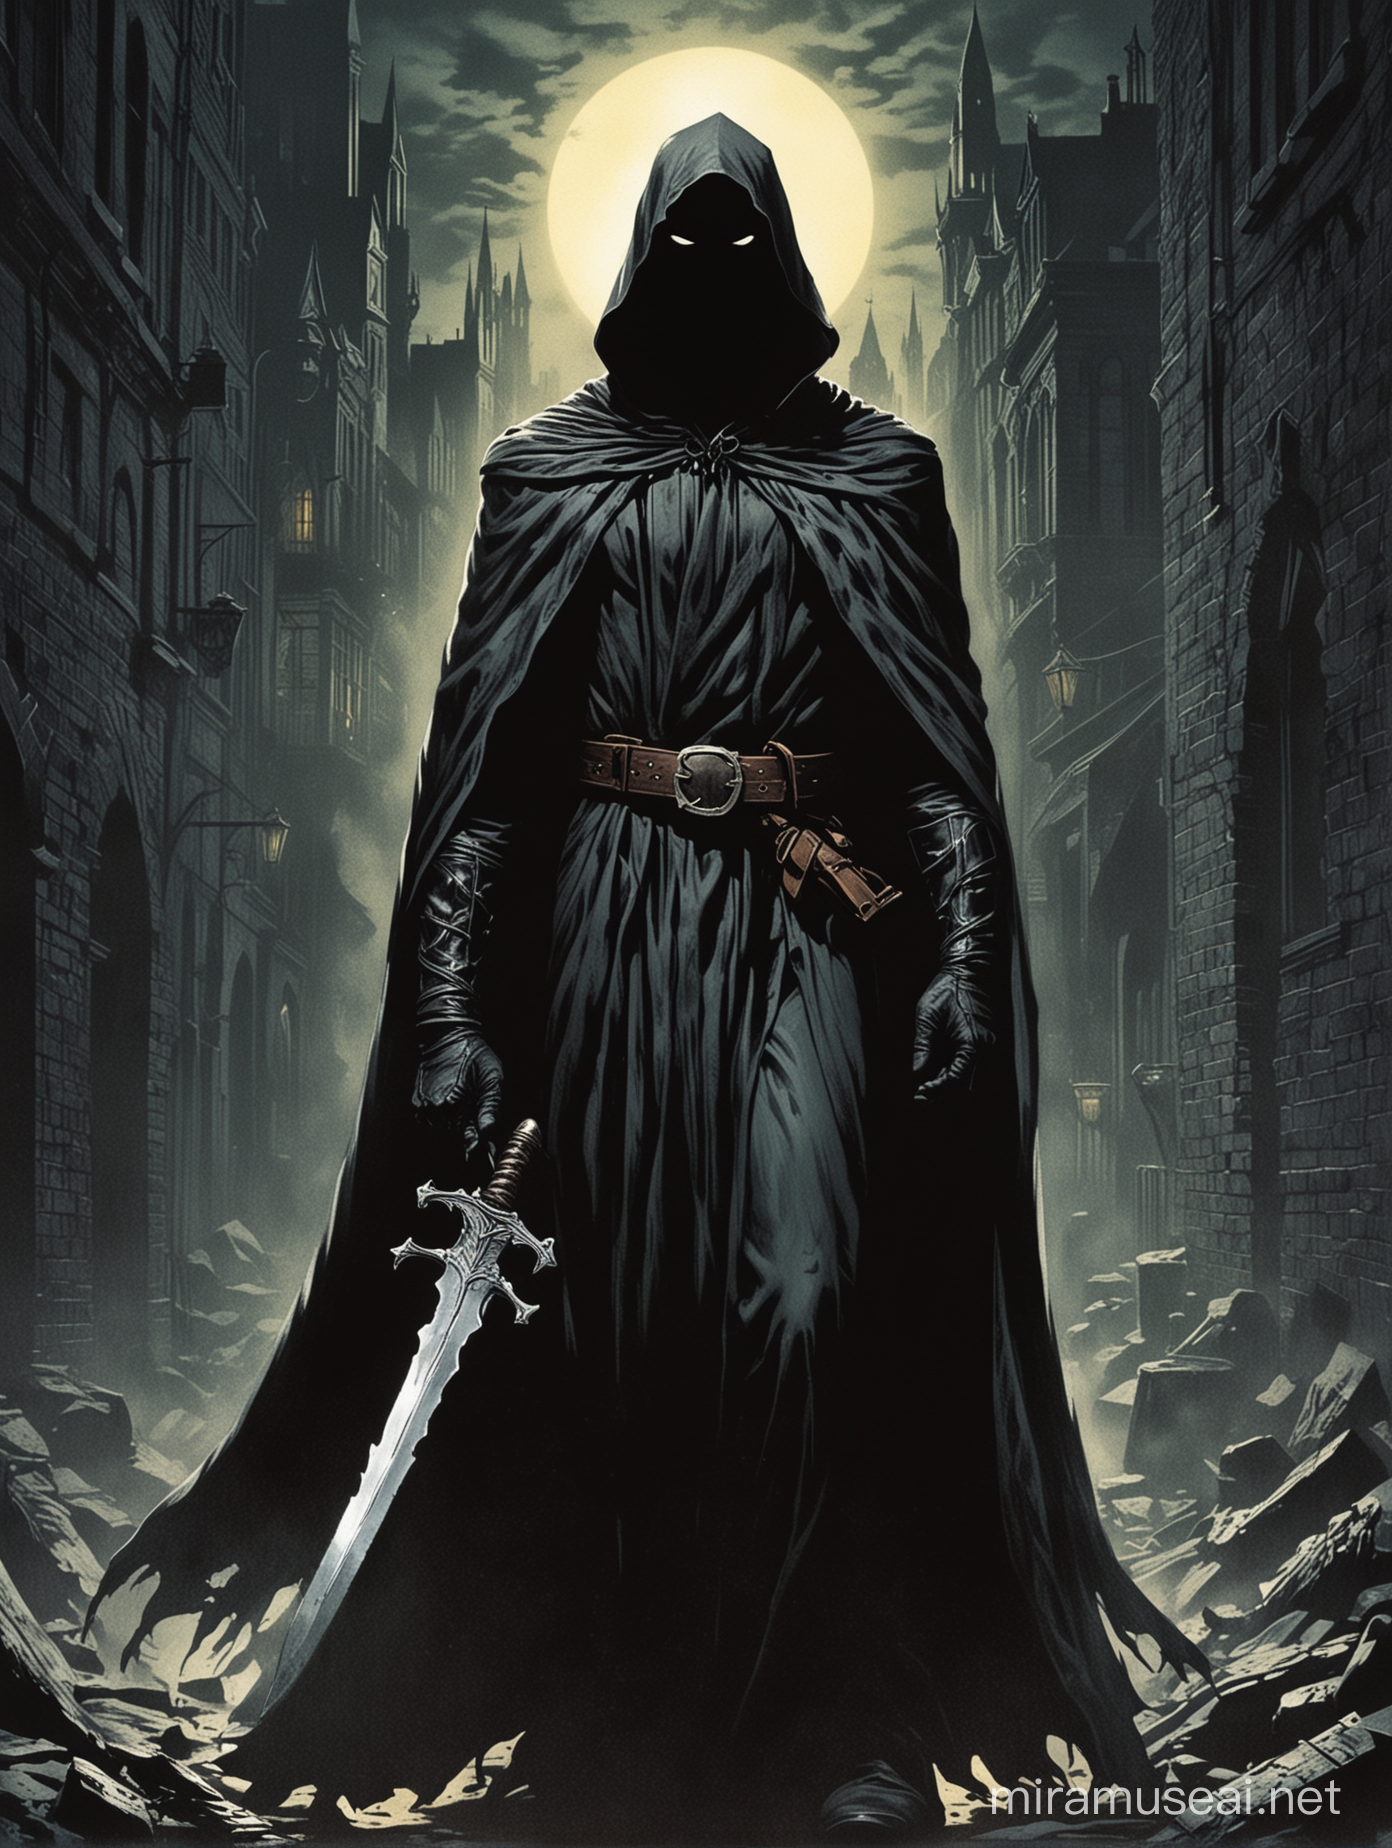 Mysterious Cloaked Figure with Dagger in Dark City Marvel Comic Book Style